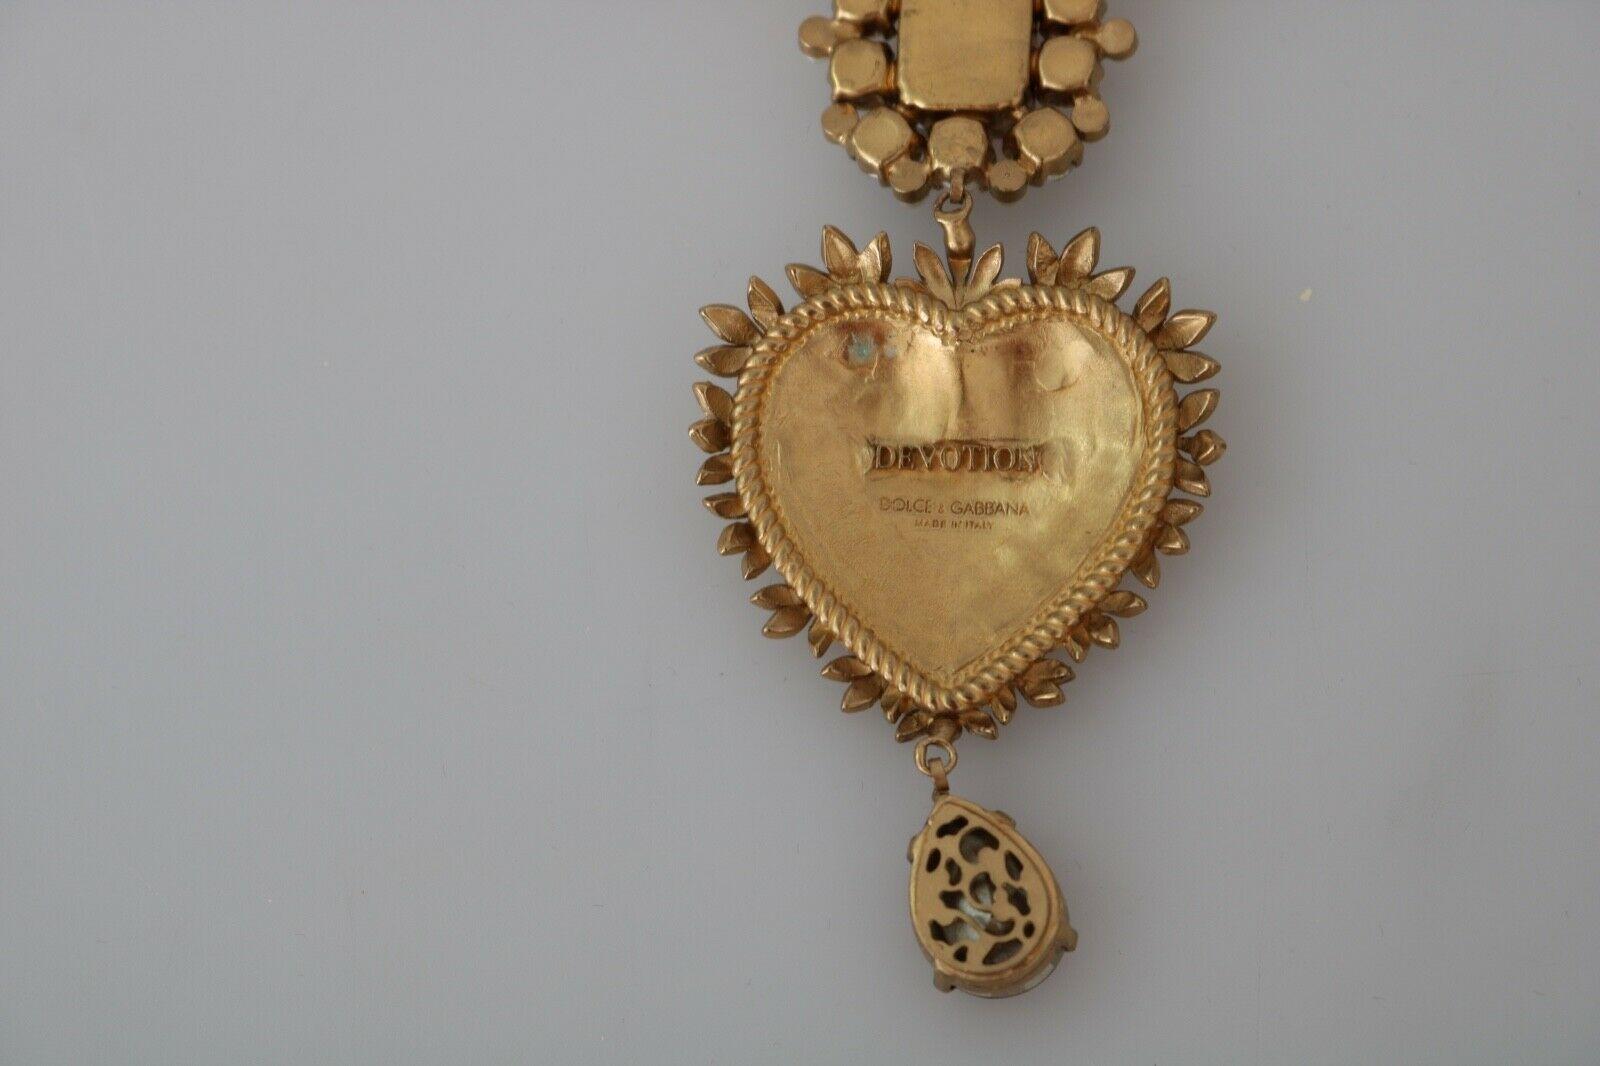 Modern Dolce & Gabbana Gold Red Metal Crystal Pearl Sacred Heart Pendant Necklace DG